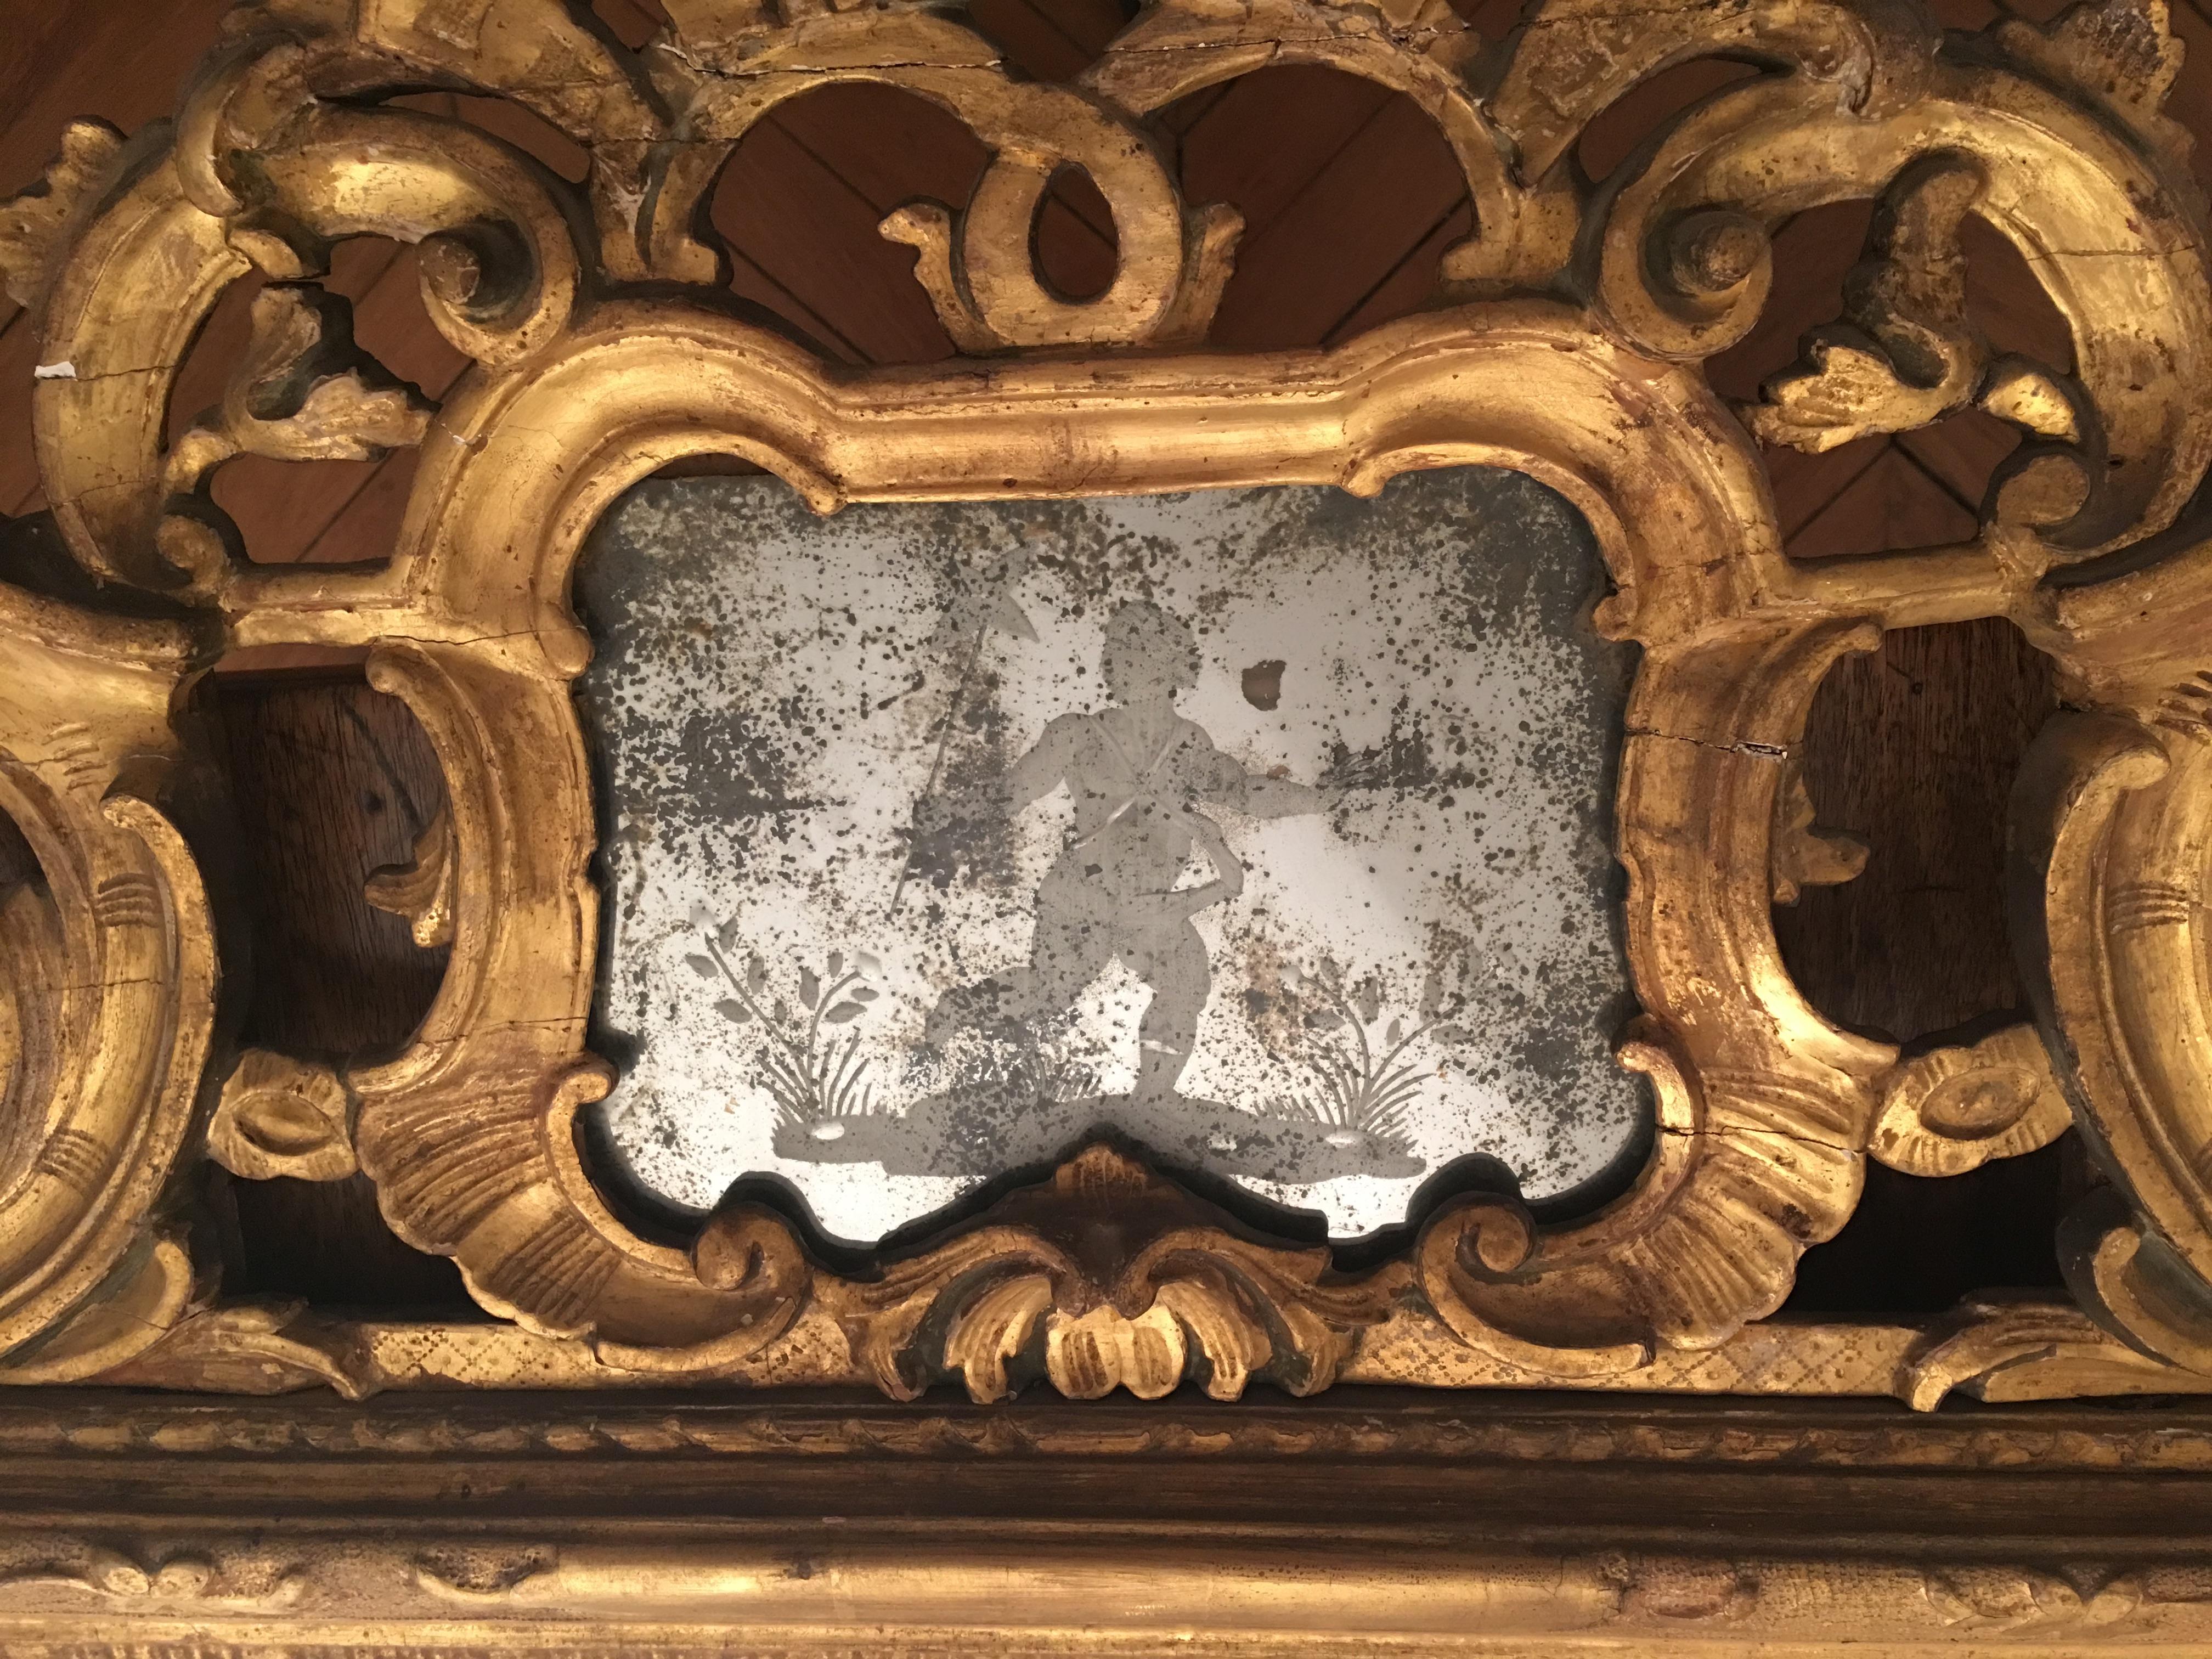 This exceptional mirror presents an undulating openworked frame showing a flower, waterleaf and scroll decor. 

The frame is topped by a large pediment with a central engraved glass cartouche showing putti playing amongst flowers. This cartouche